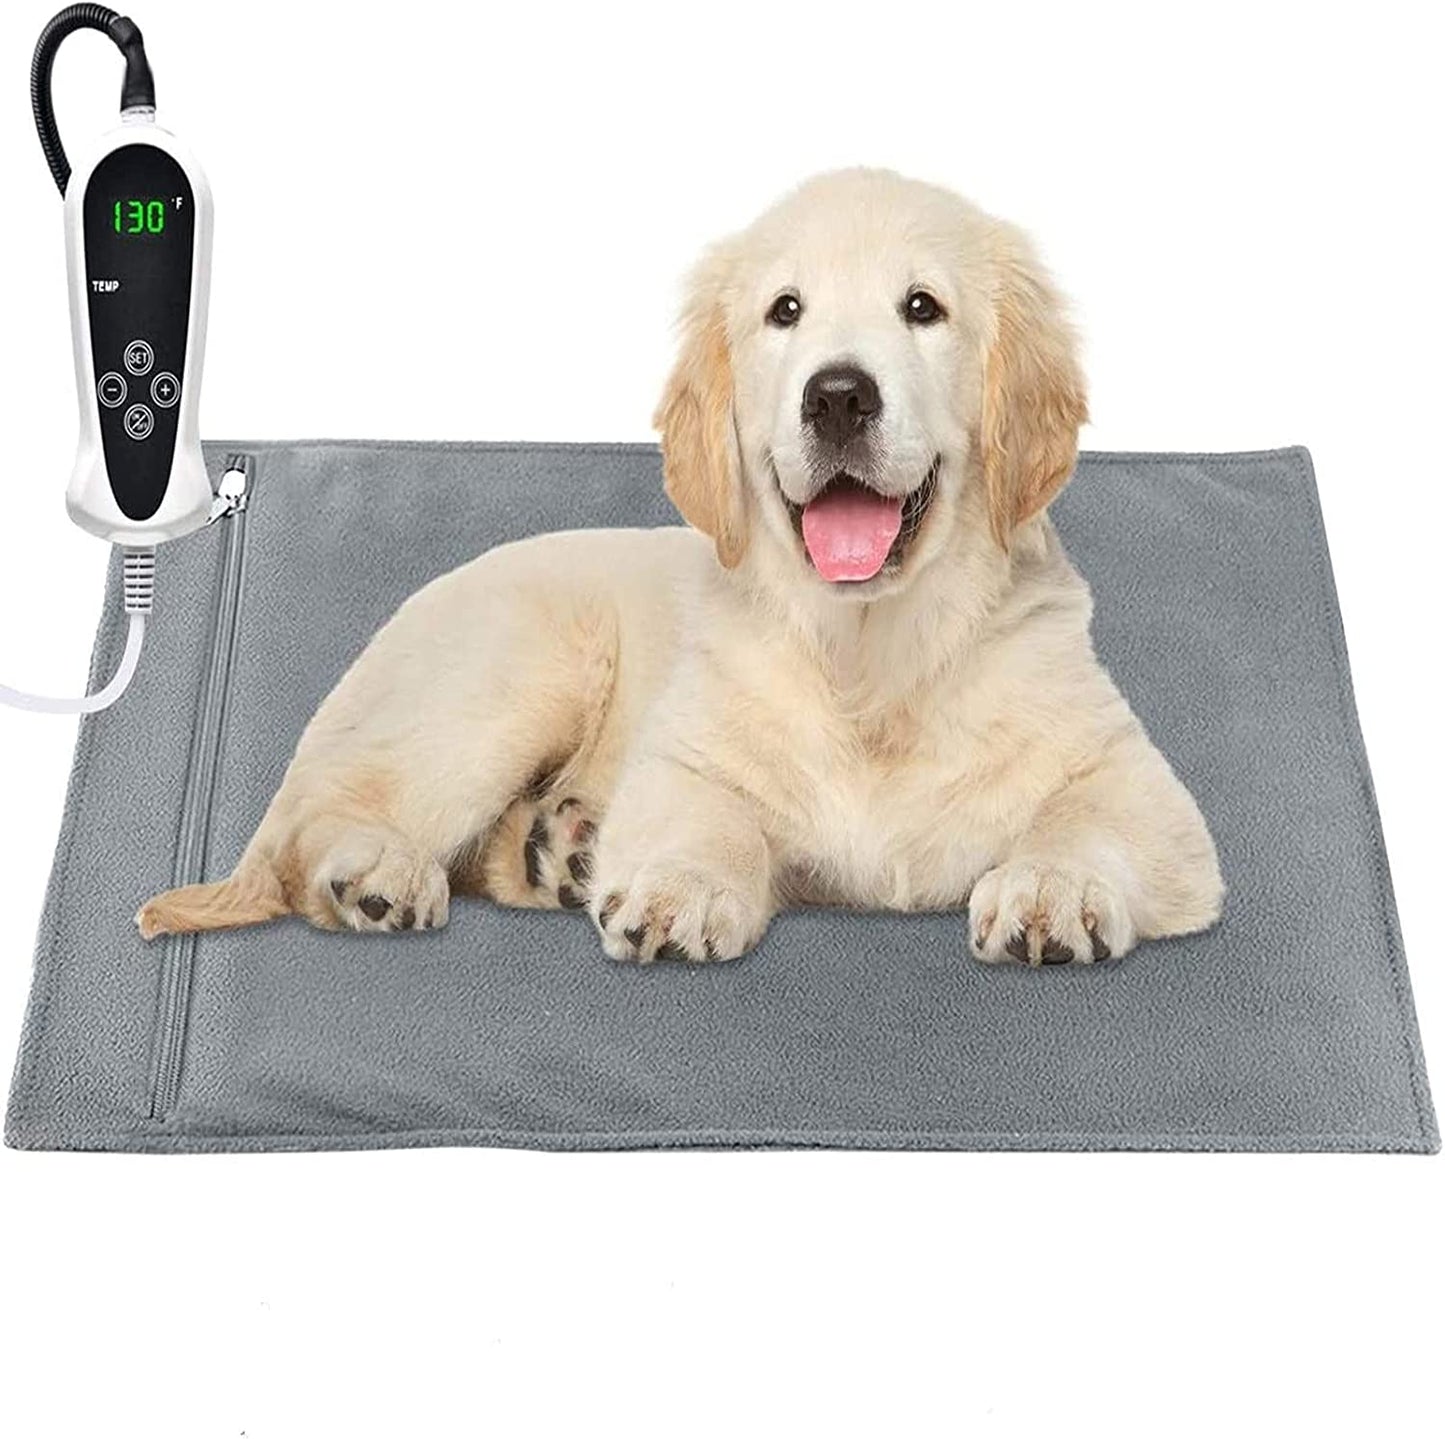 Pet Heating Pad, Upgraded Electric Dog Cat Heating Pad Indoor Waterproof, Auto Power off (Large: 22"X 18")